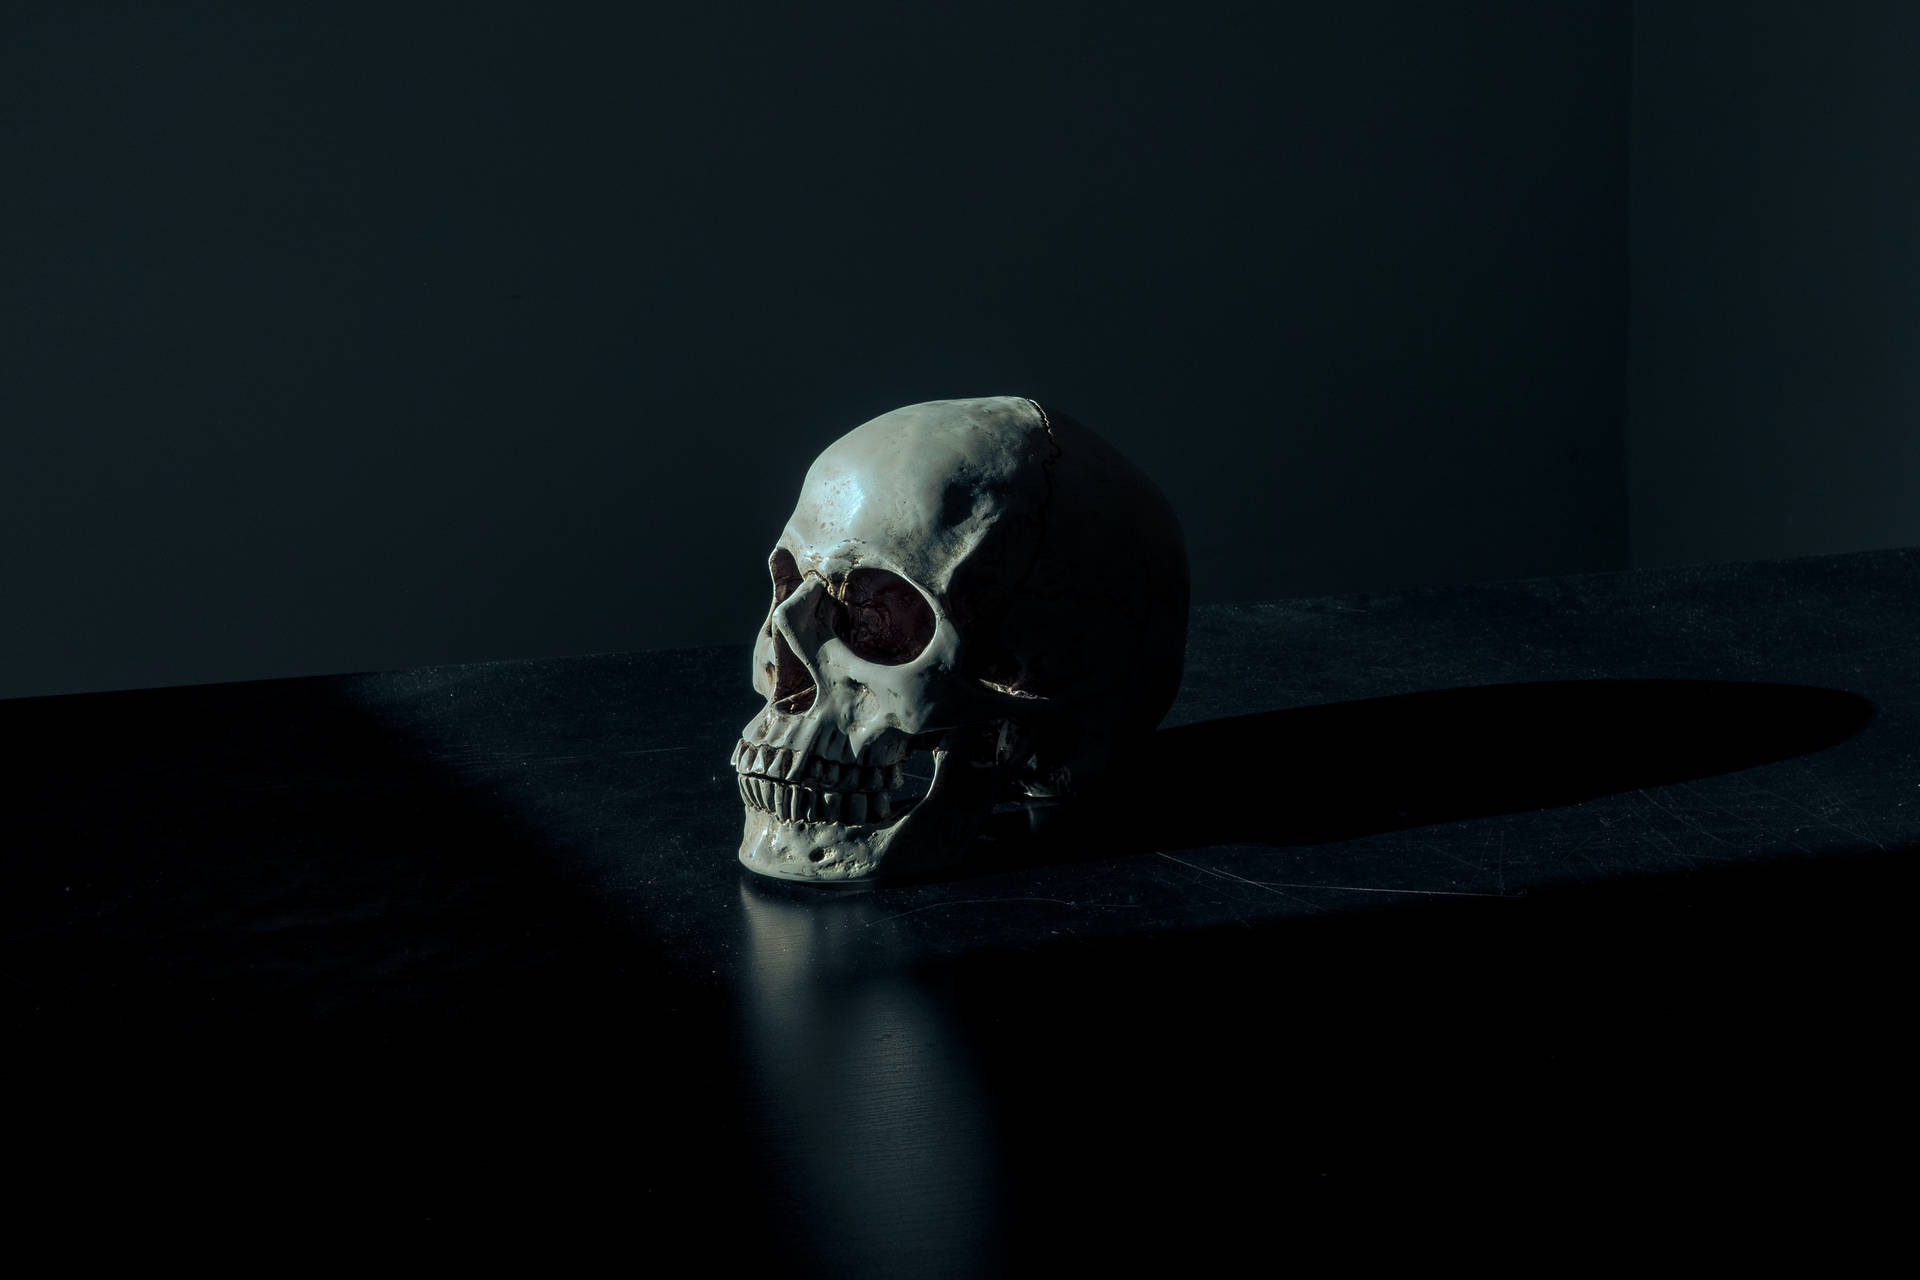 Dark Aesthetic 4466X2978 Wallpaper and Background Image